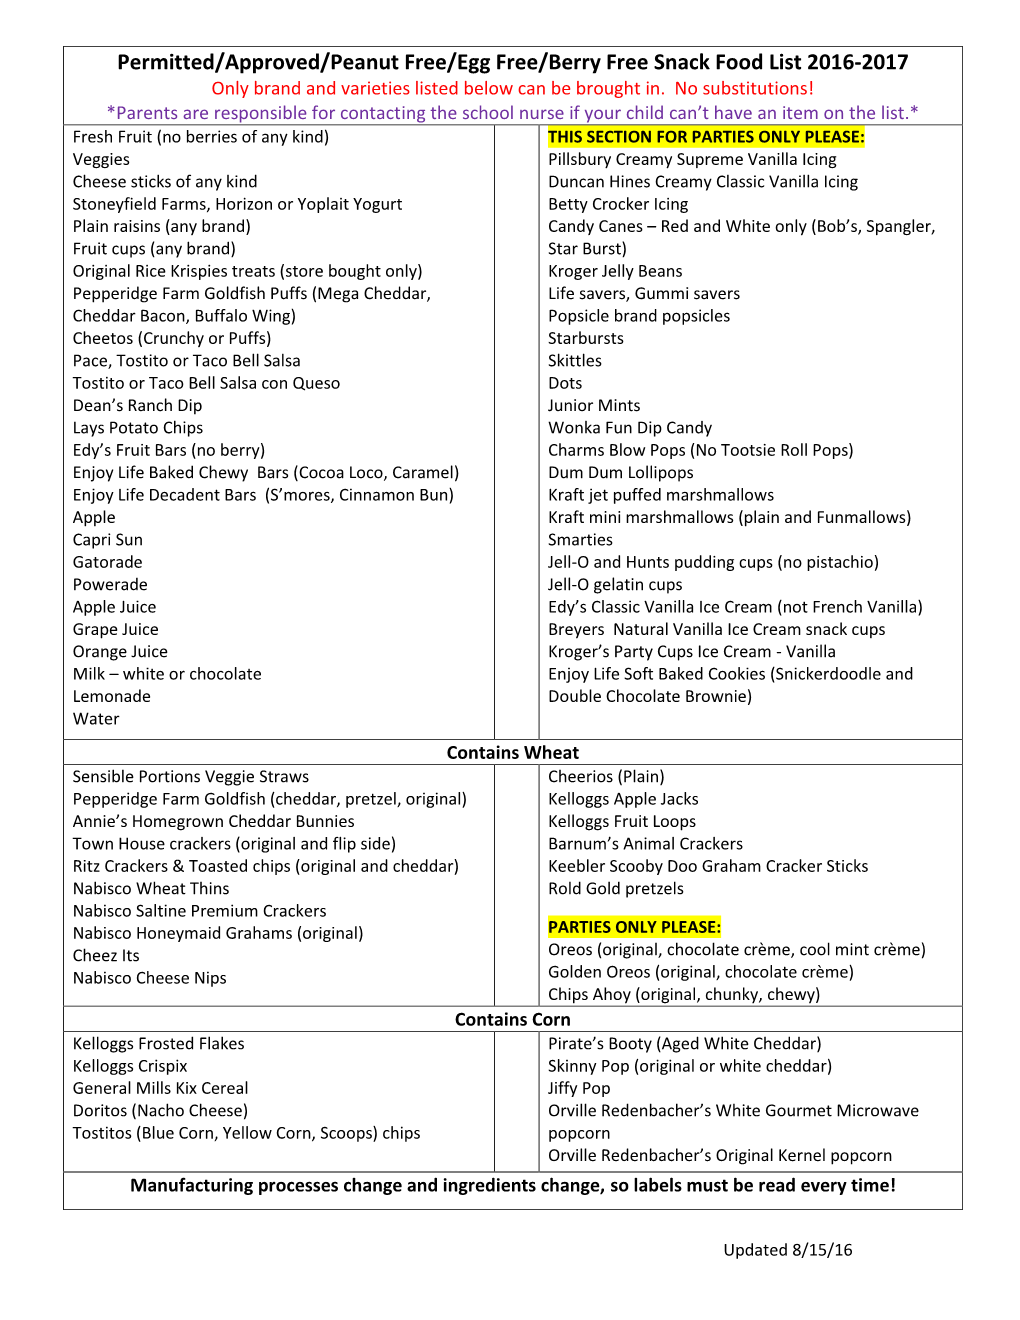 Permitted/Approved/Peanut Free/Egg Free/Berry Free Snack Food List 2016-2017 Only Brand and Varieties Listed Below Can Be Brought In